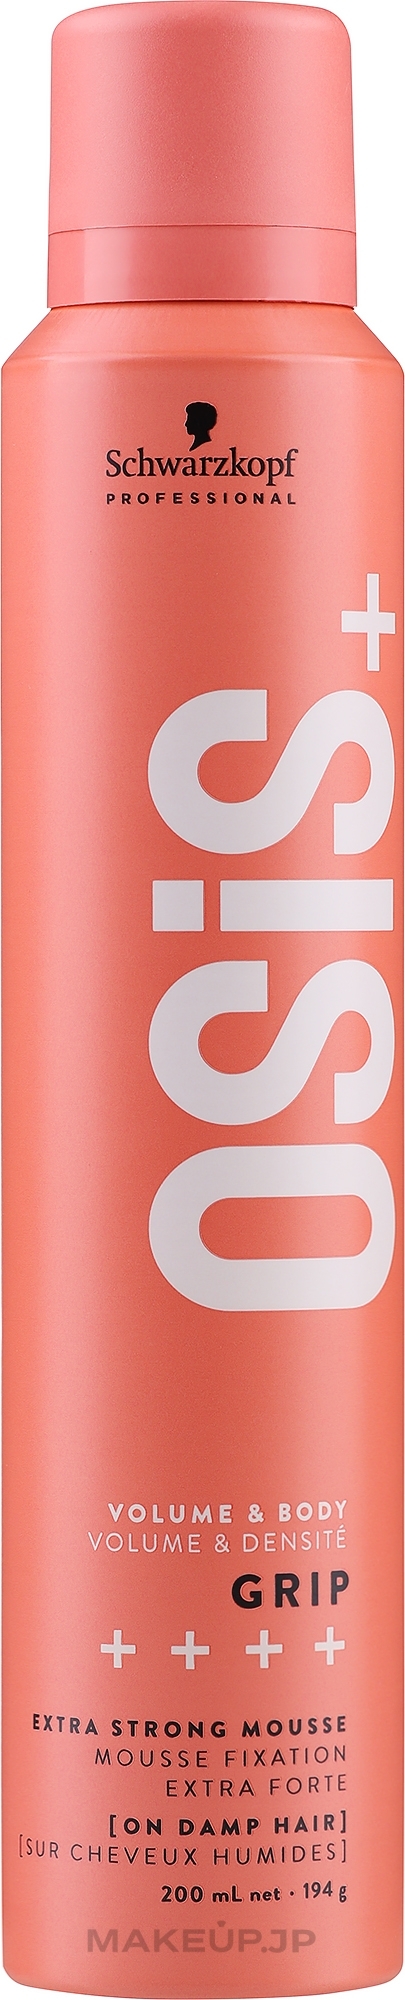 Ultra Strong Hold Hair Mousse - Schwarzkopf Professional Osis style Grip Super Hold Haarmousse — photo 200 ml